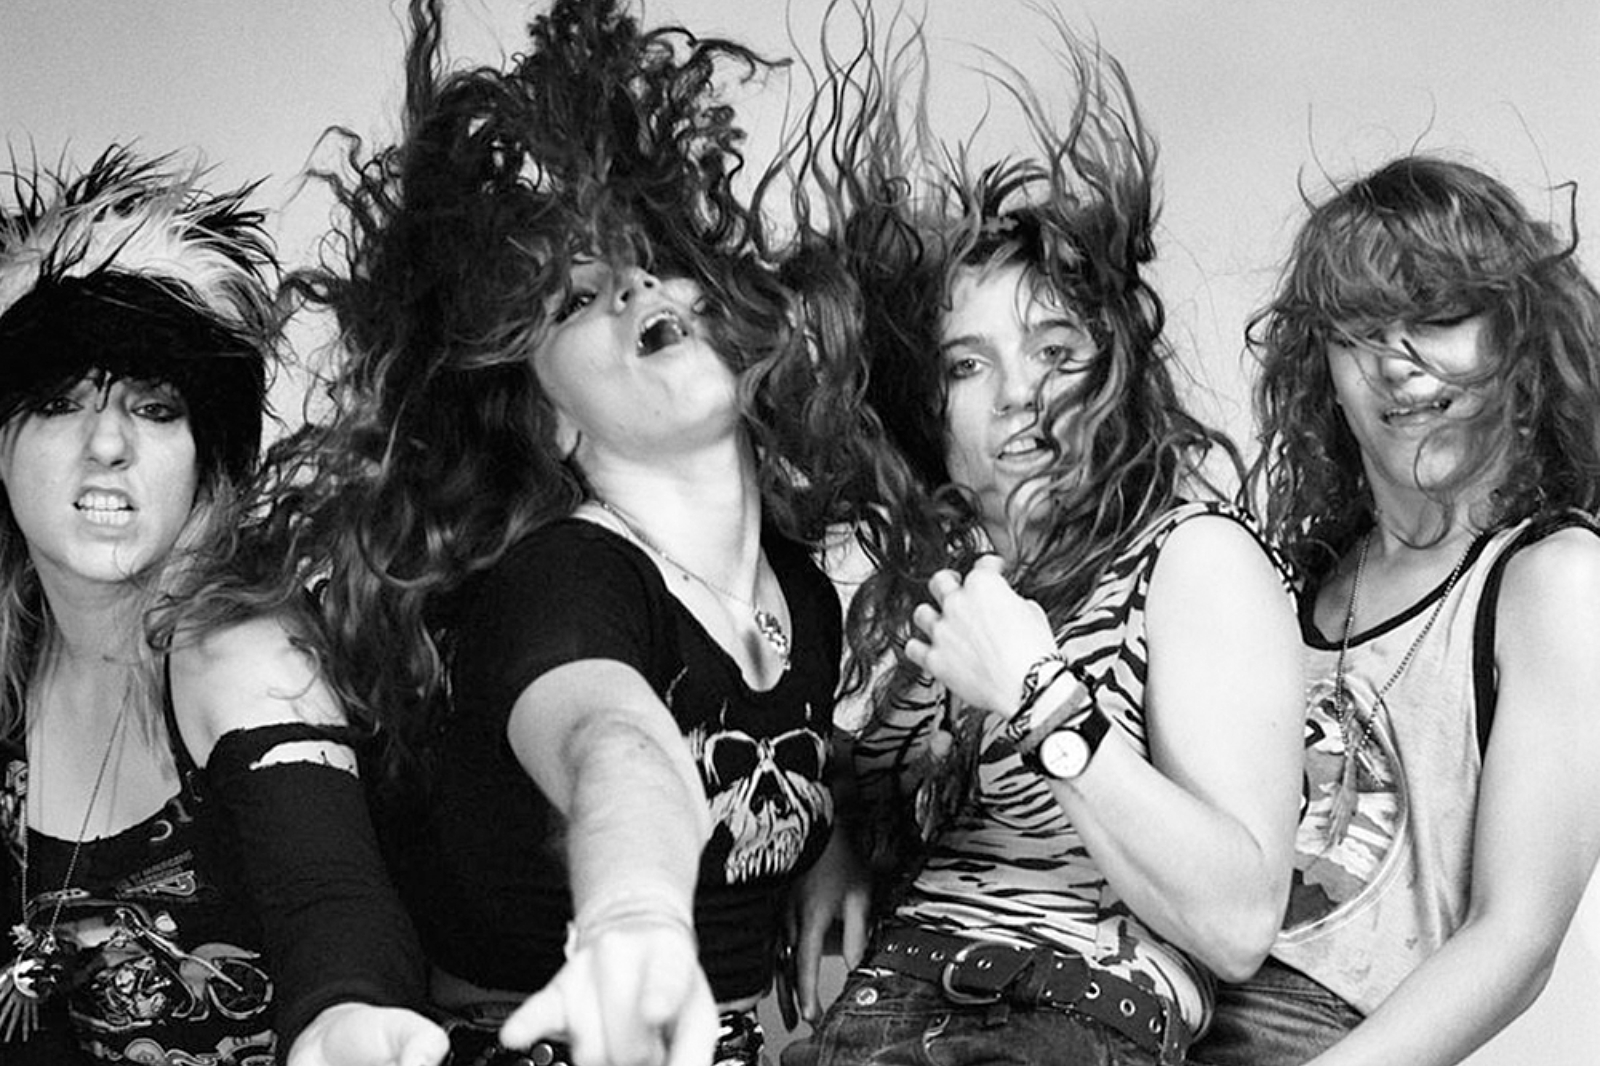 L7 are back! Band announce reunion shows, Download Festival appearance